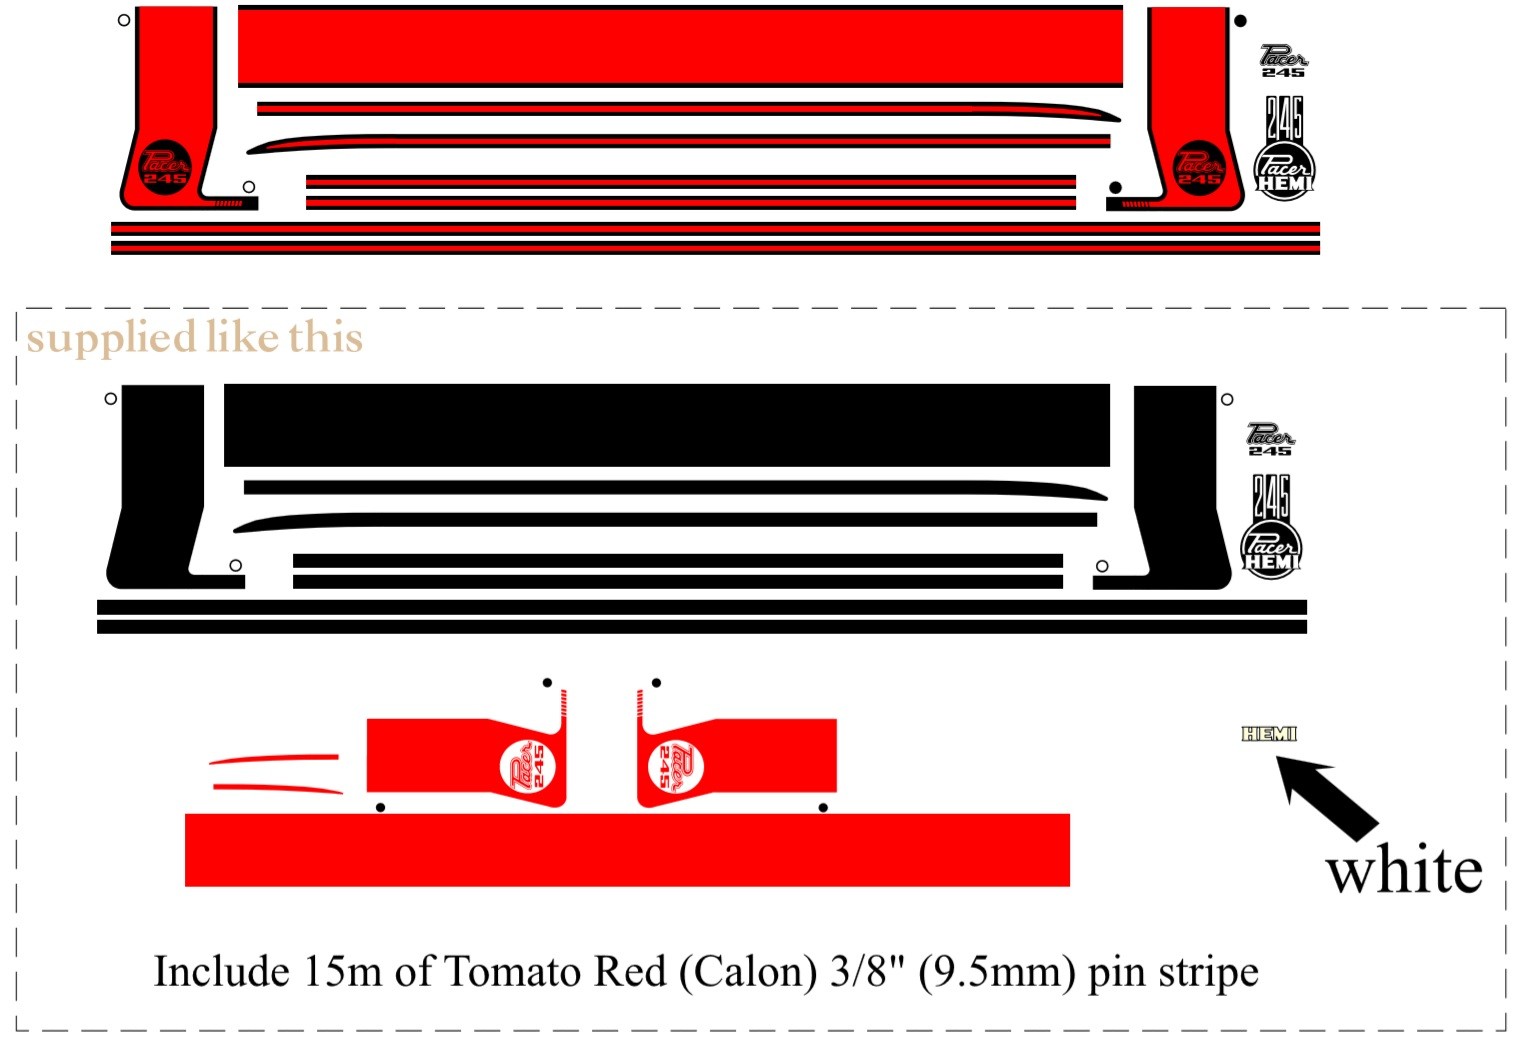 Body Stripe Kit : A88/A84 option codes (Suit VG Pacer Hardtop/Coupe) : Black with RED inserts